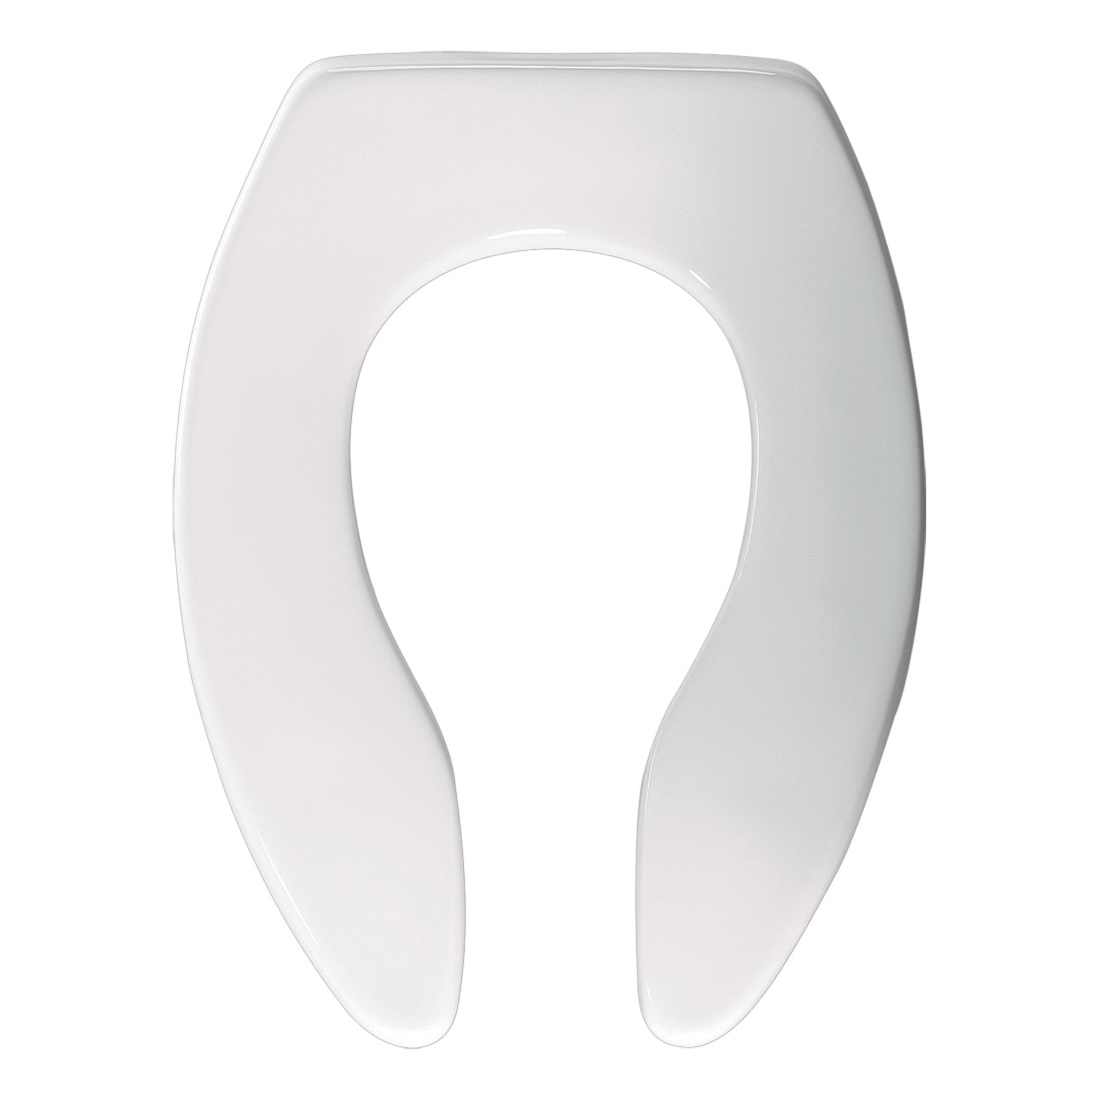 Olsonite® 95CT 000 Heavy Duty Toilet Seat, Elongated Bowl, Open Front, Plastic, White, Non Self-Sustaining Hinge, Domestic